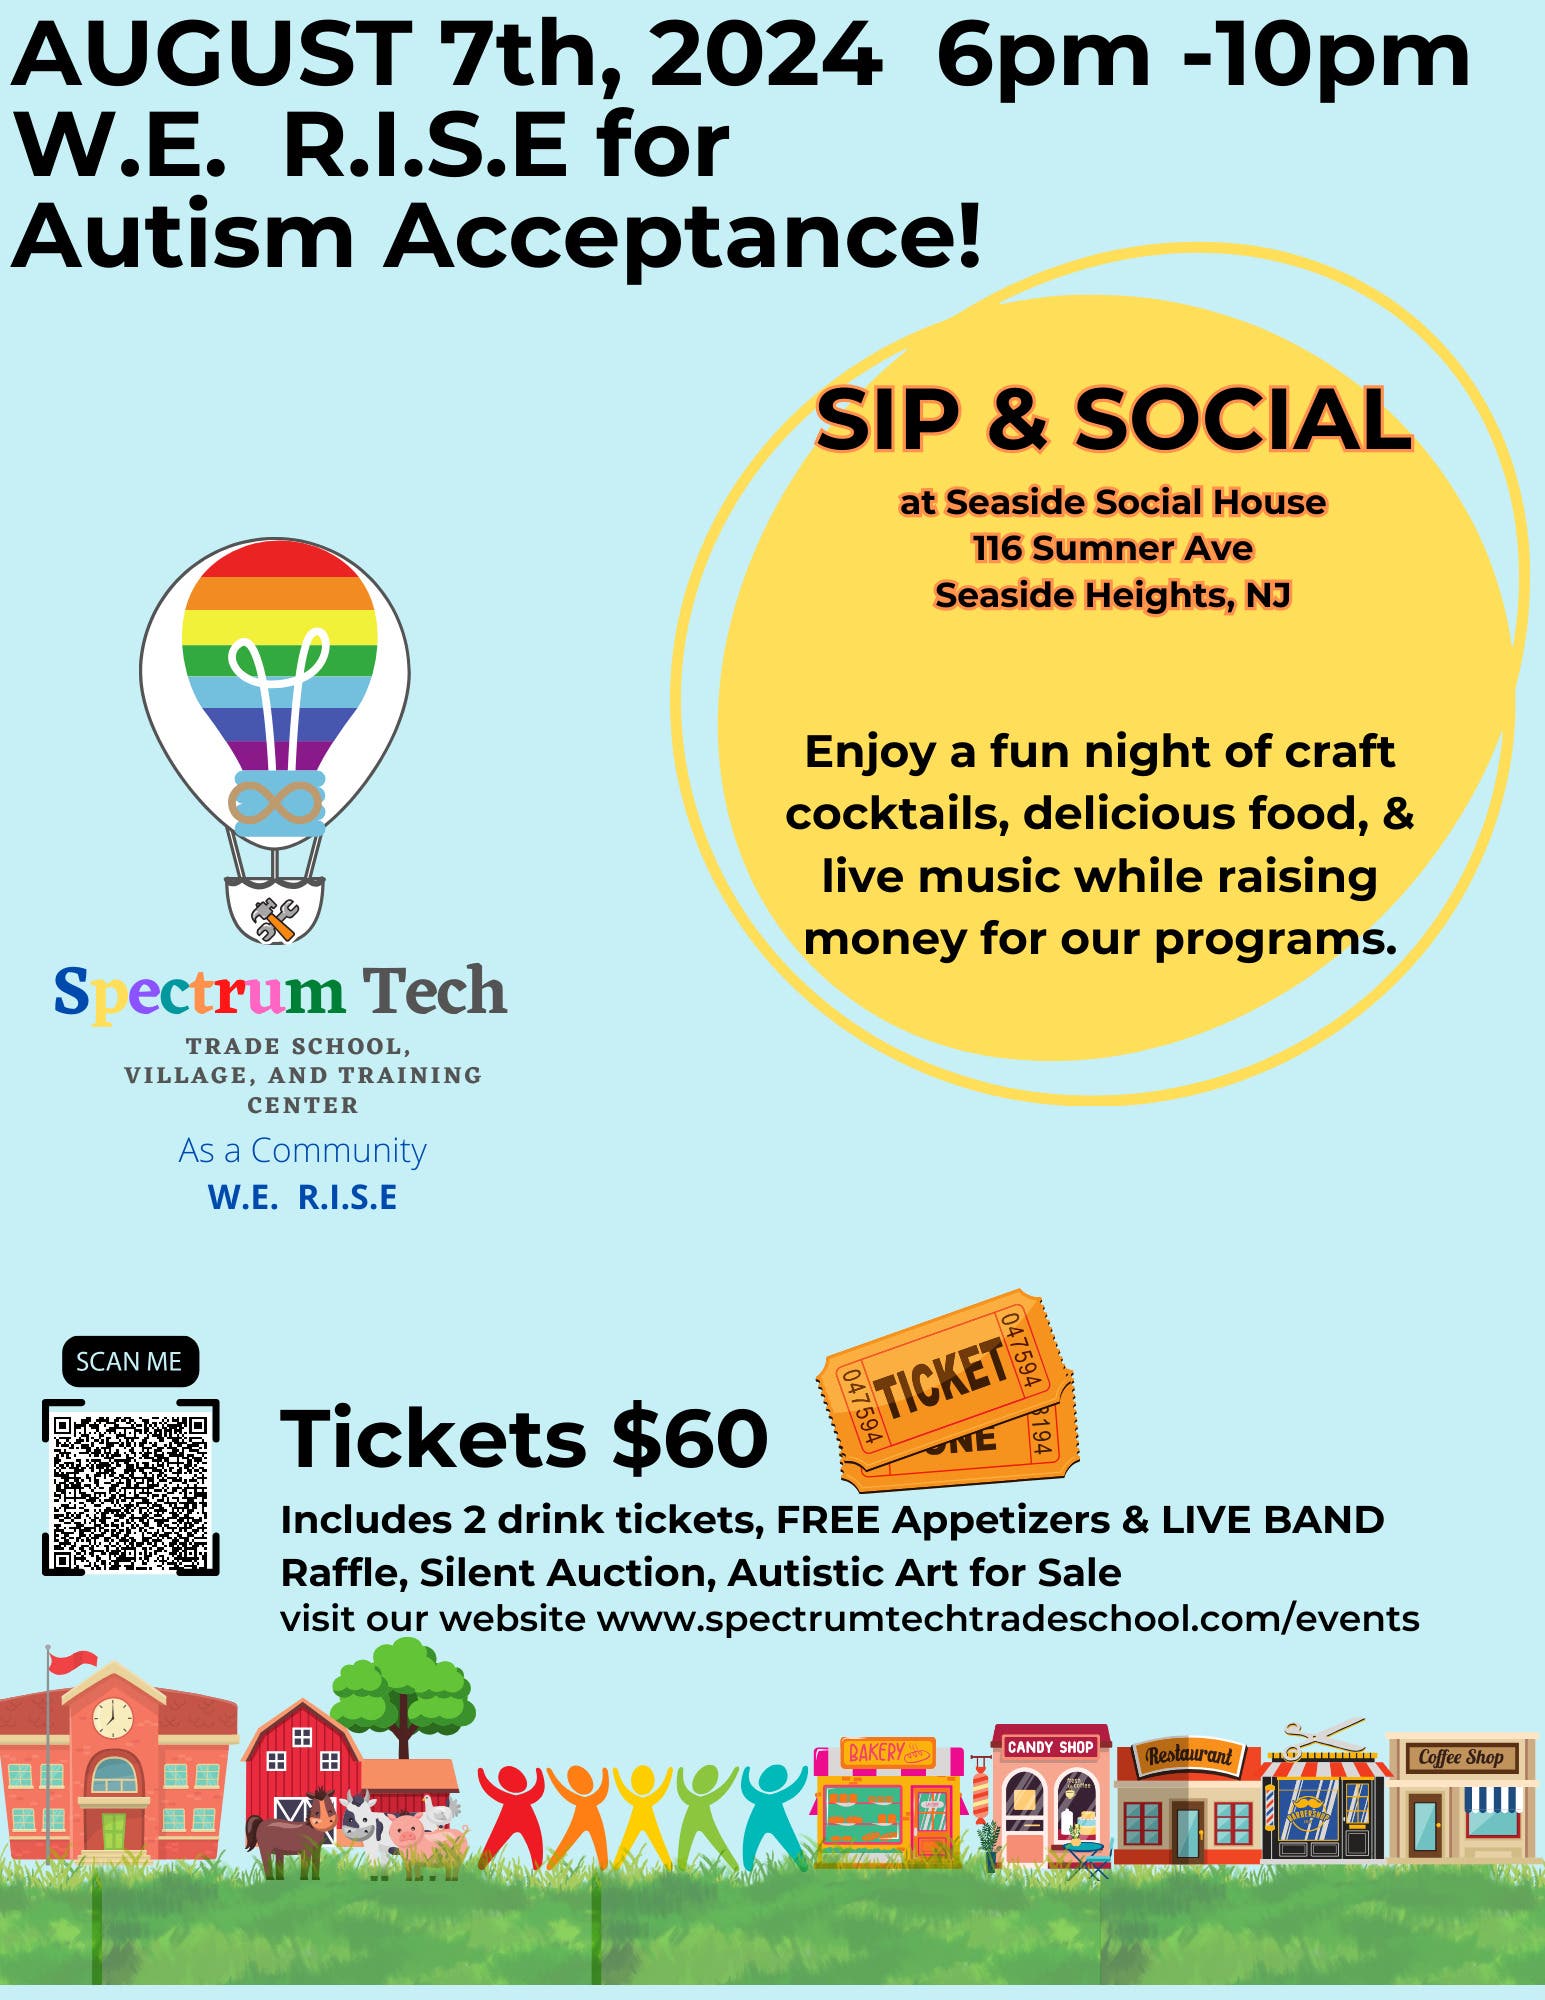 W.E. R.I.S.E. for Autism Acceptance Sip and Social 